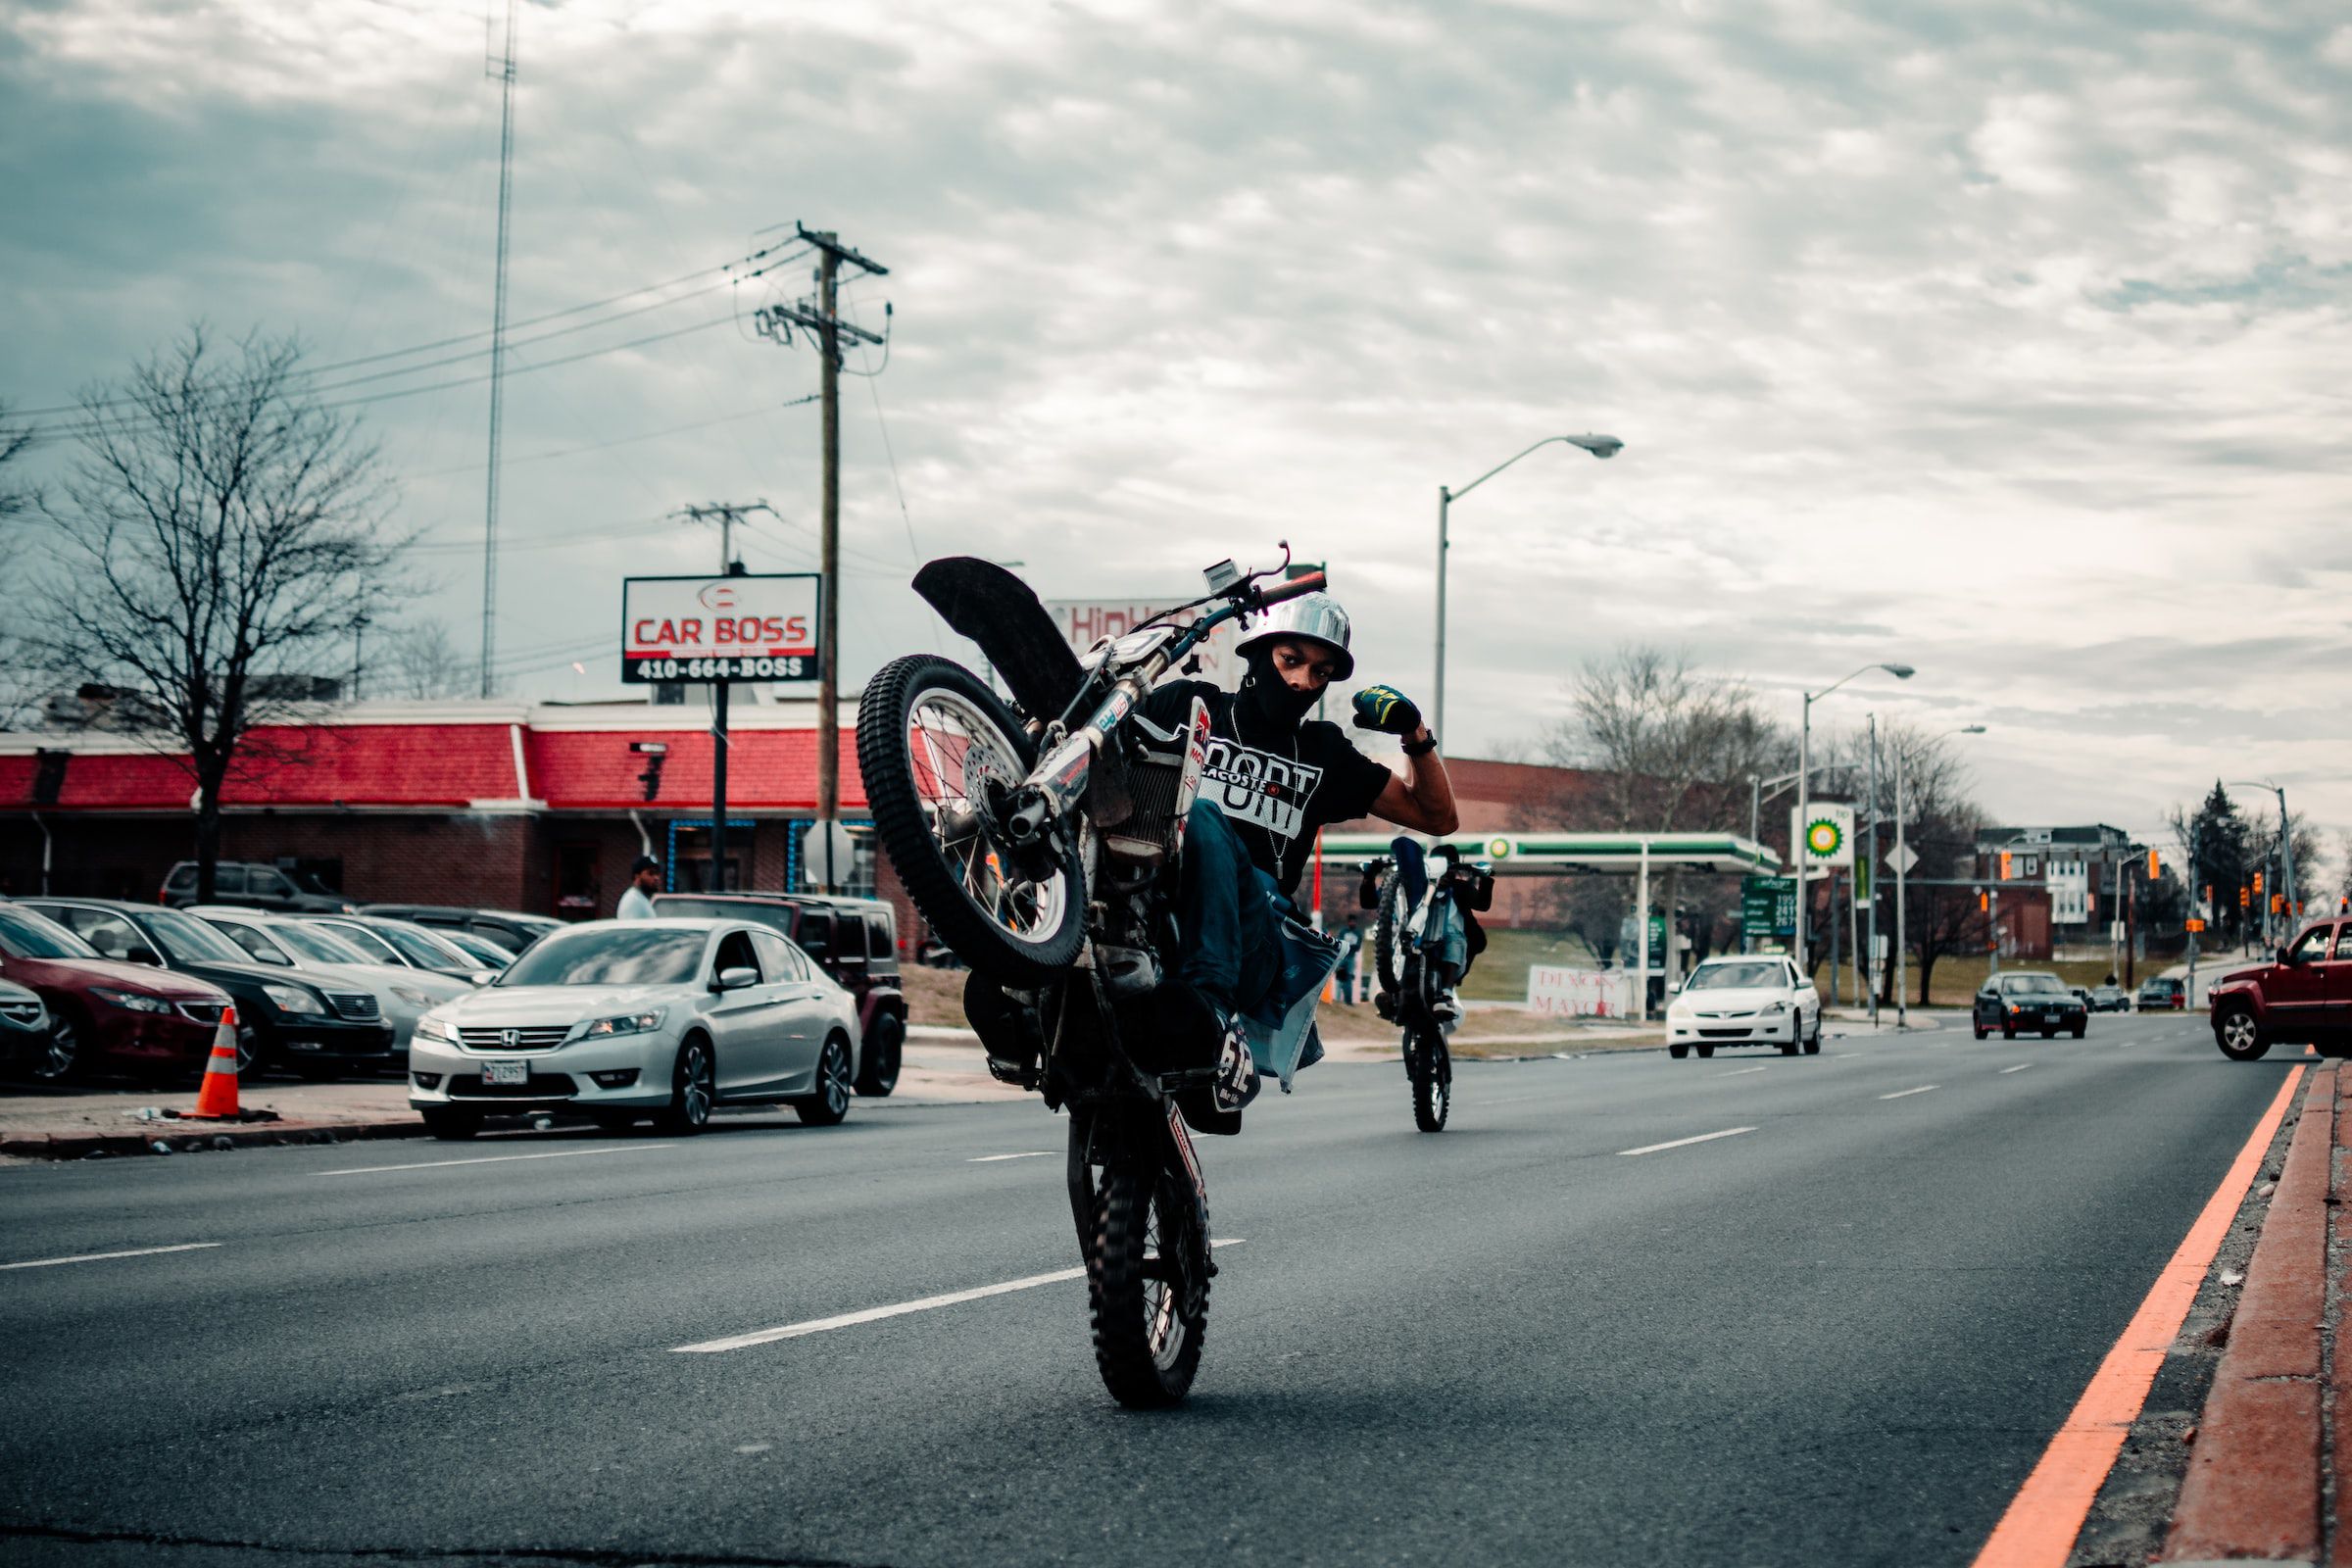 Dirt bikers are running wild in Philly. Colin Lloyd/Unsplash